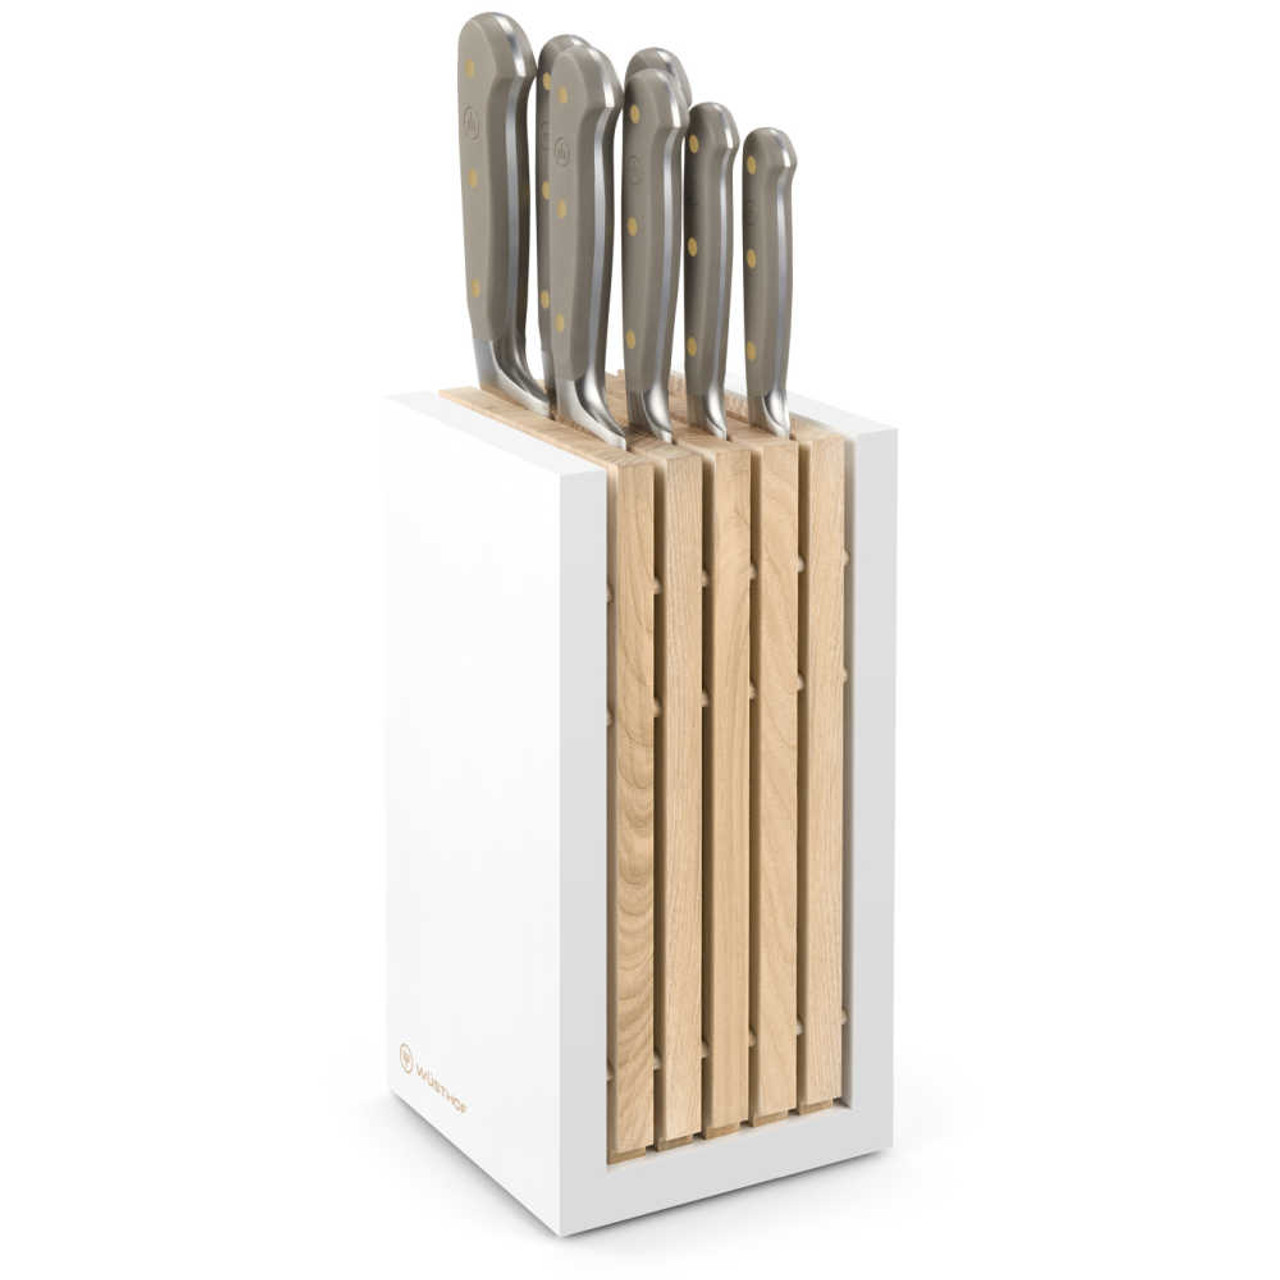 https://cdn11.bigcommerce.com/s-hccytny0od/images/stencil/1280x1280/products/5391/23403/Wusthof_Classic_Color_8-Piece_Knife_Block_Set_Velvet_Oyster__33268.1682004559.jpg?c=2?imbypass=on